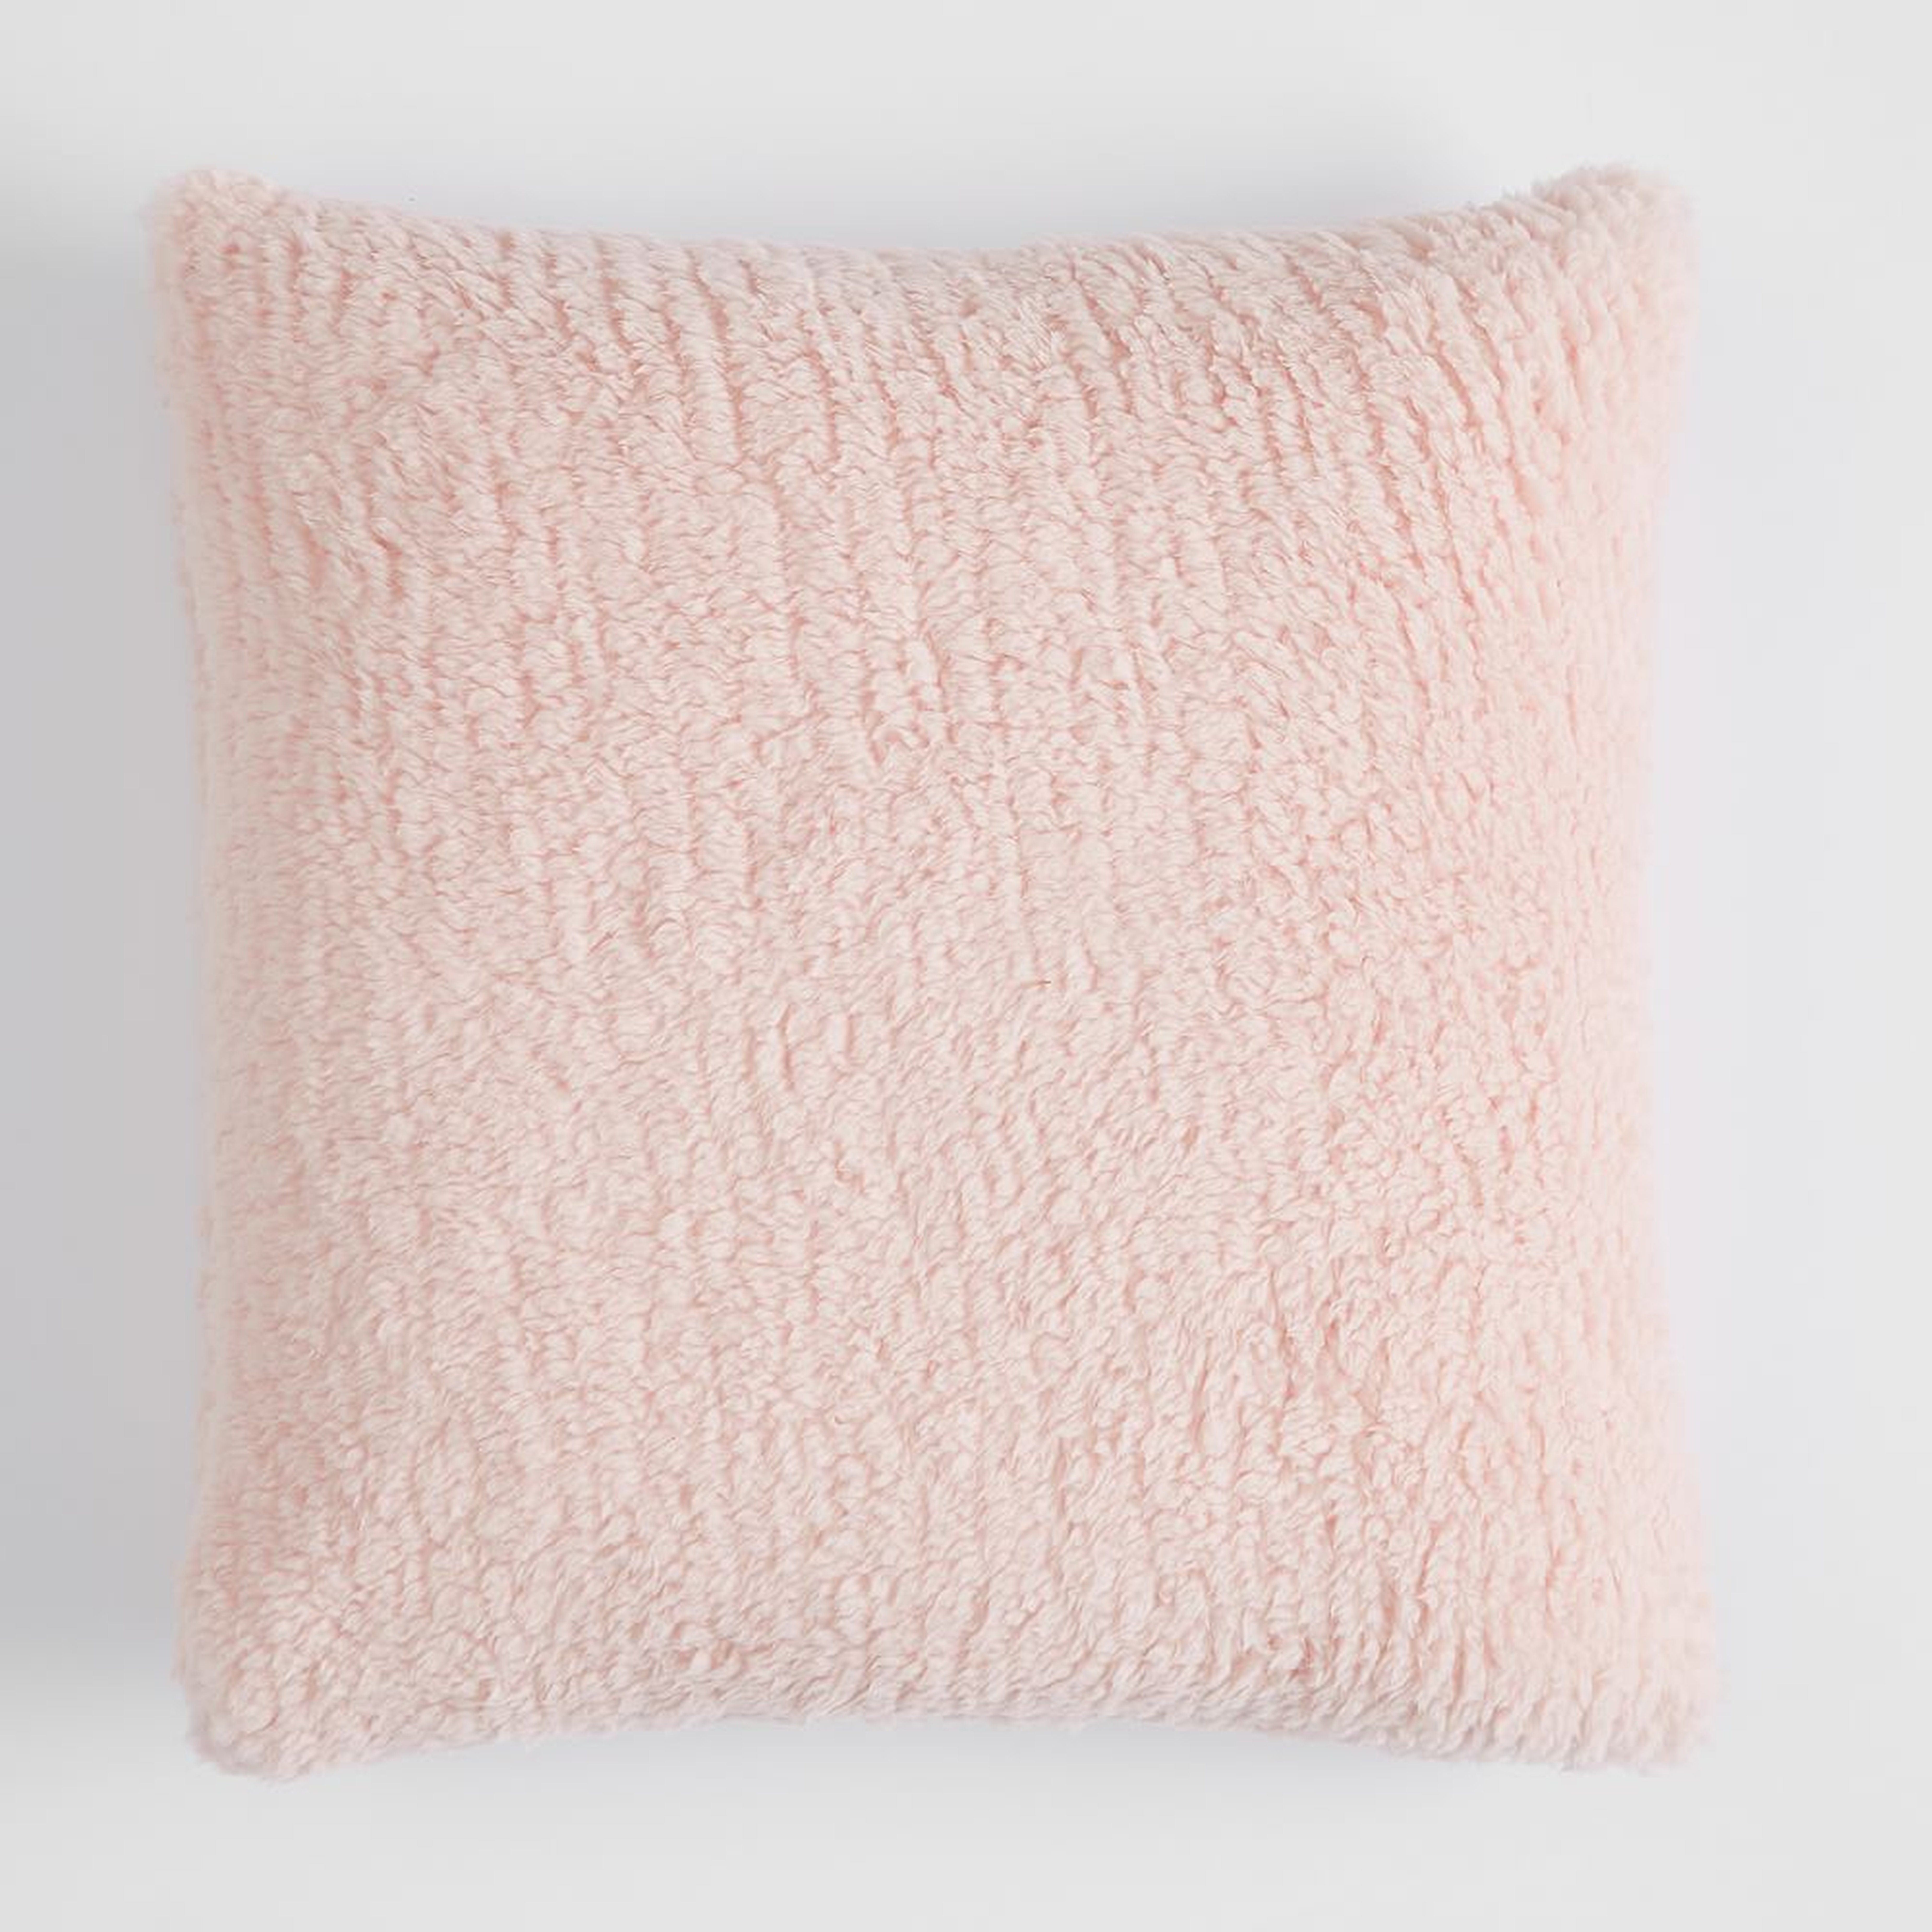 Cozy Recycled Sherpa Pillow cover, 18x18, Powdered Blush - Pottery Barn Teen